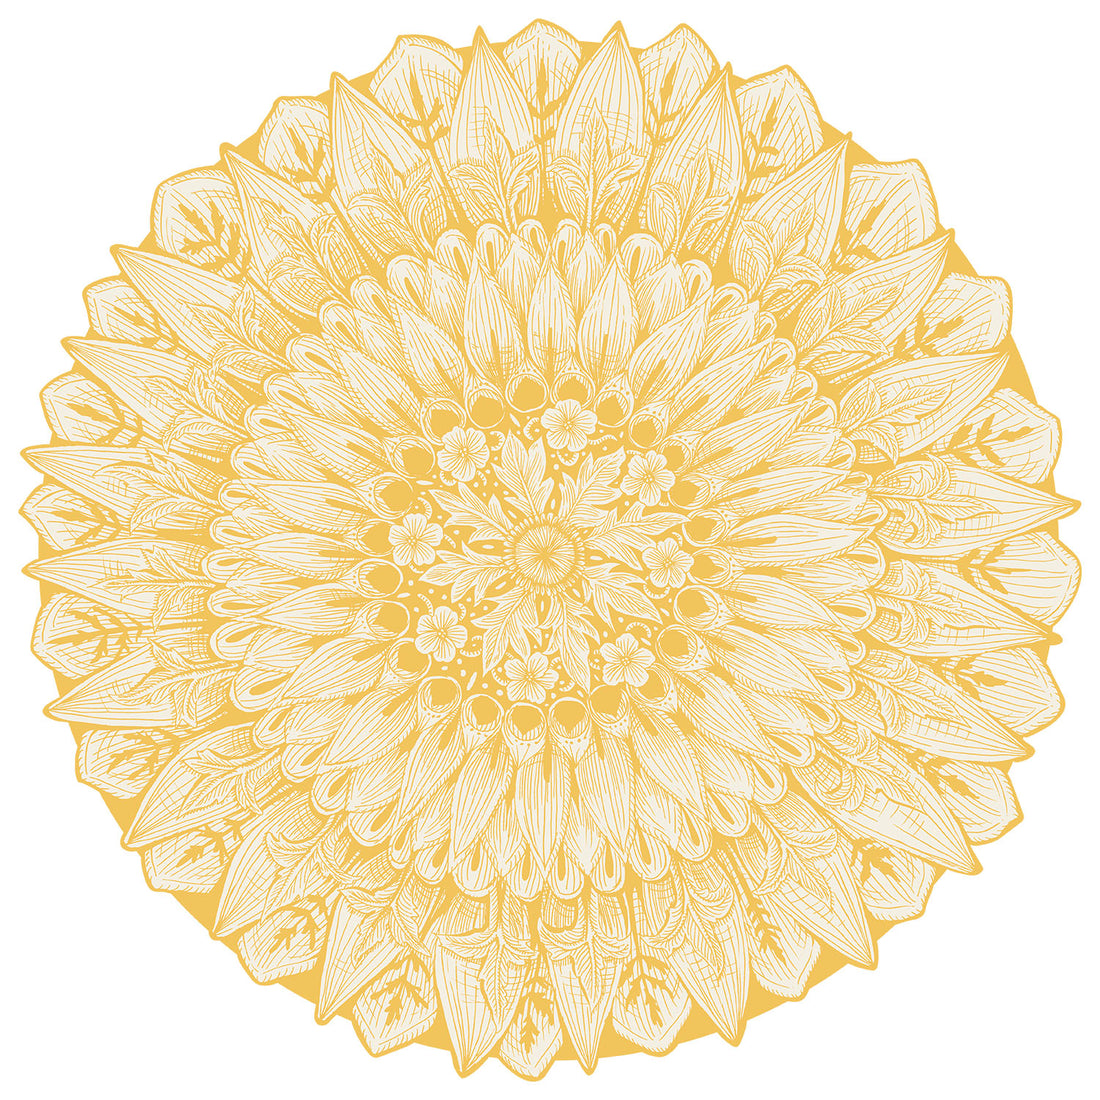 A round, radially symmetrical die-cut illustration depicting rings of flower petals and floral motifs, in bright yellow on a white background.